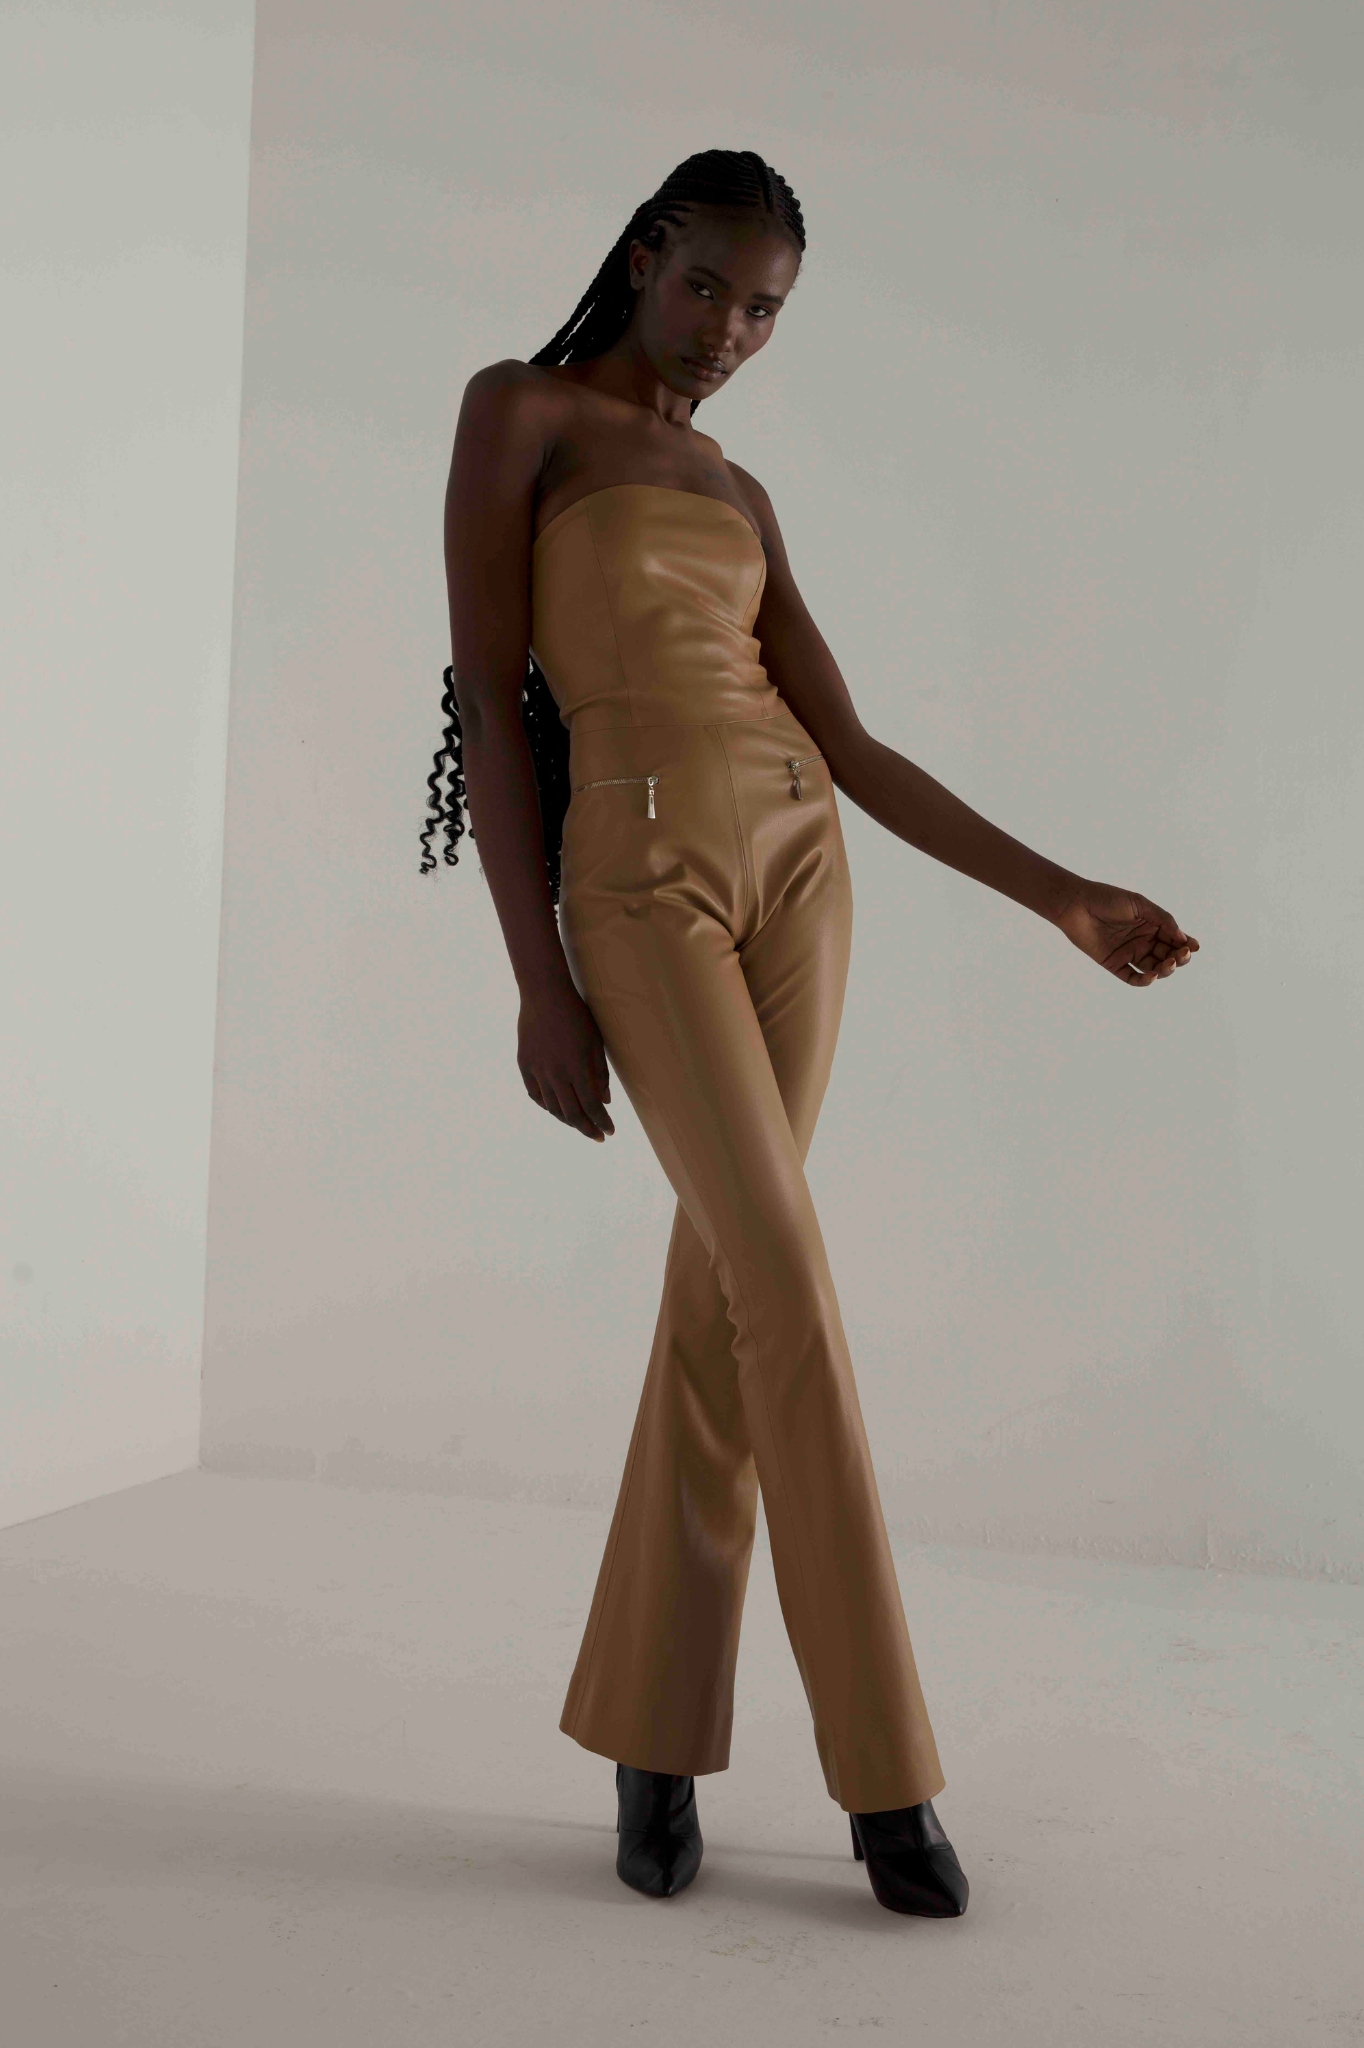 Vegan Leather Bodycon Jumpsuit With Zipper Deatiling